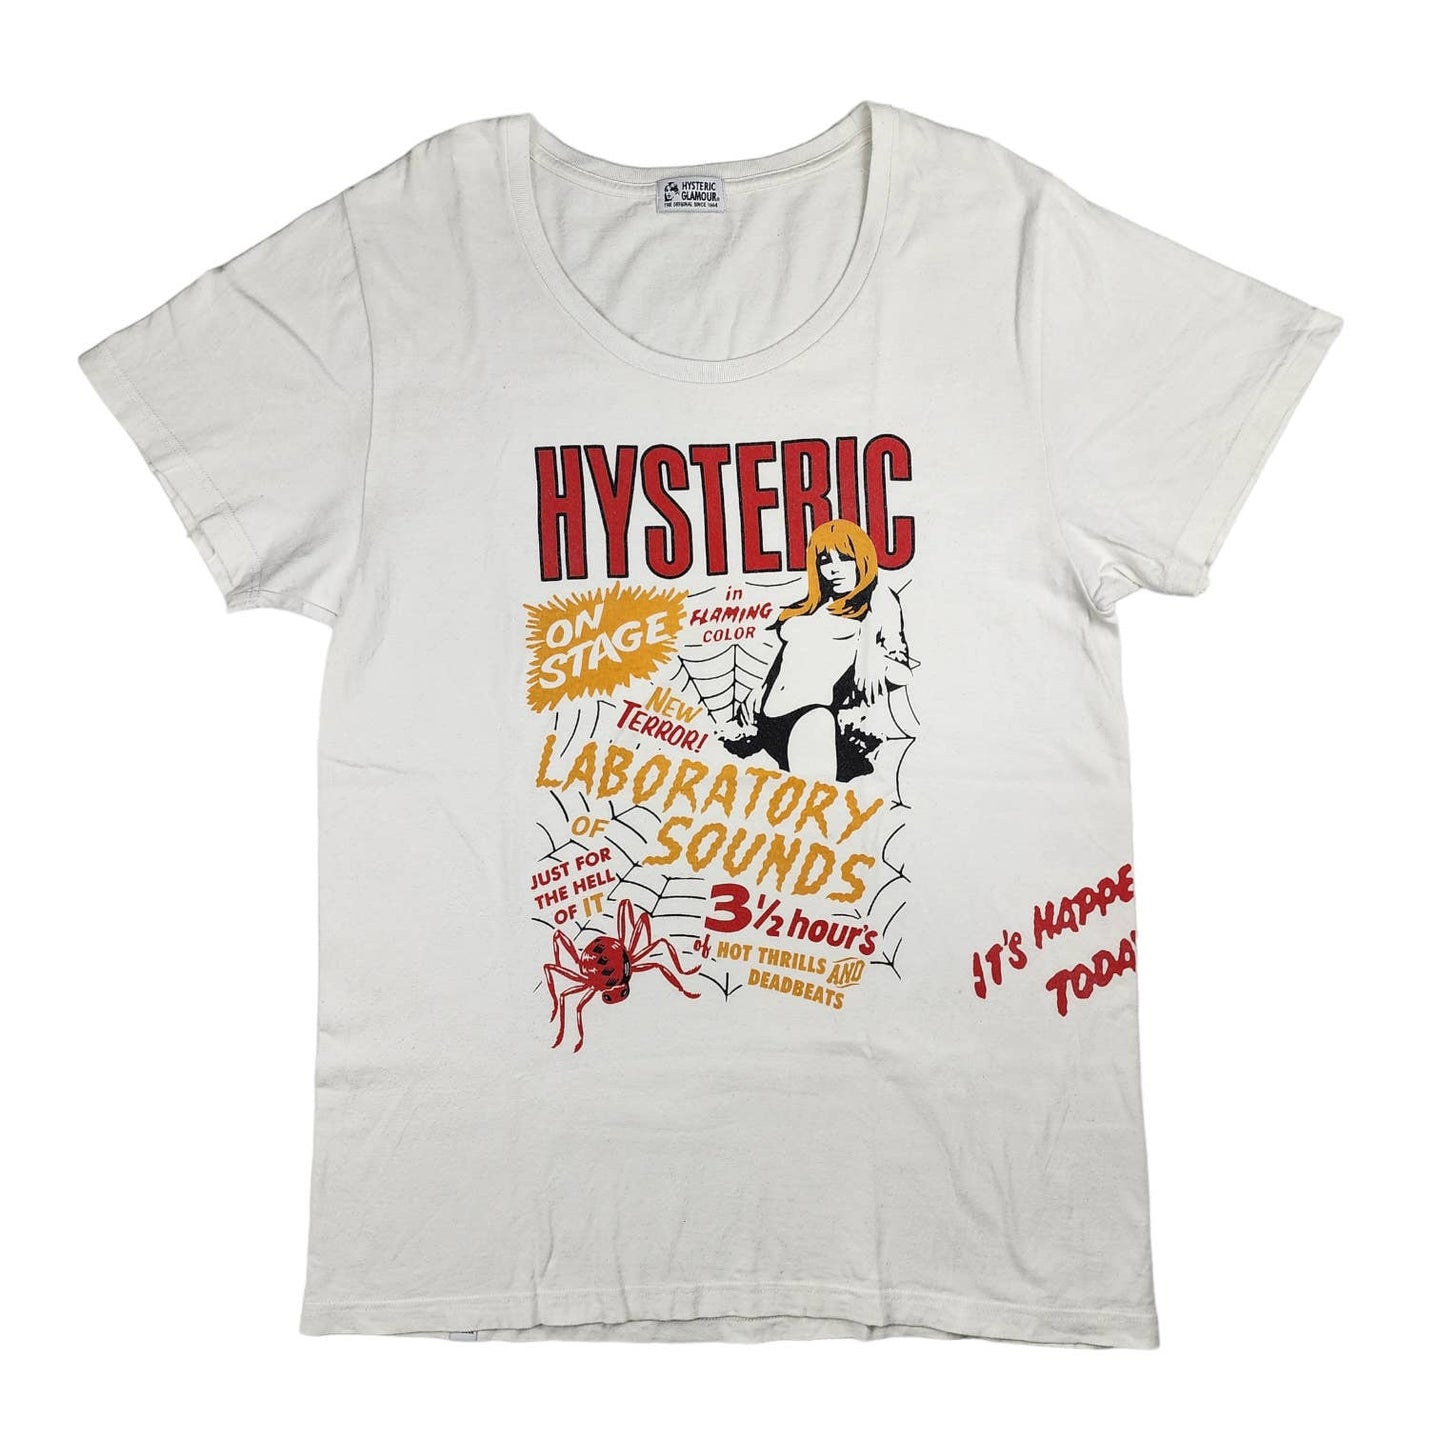 Hysteric Glamour Tee Laboratory Sounds WHITE RED Vintage